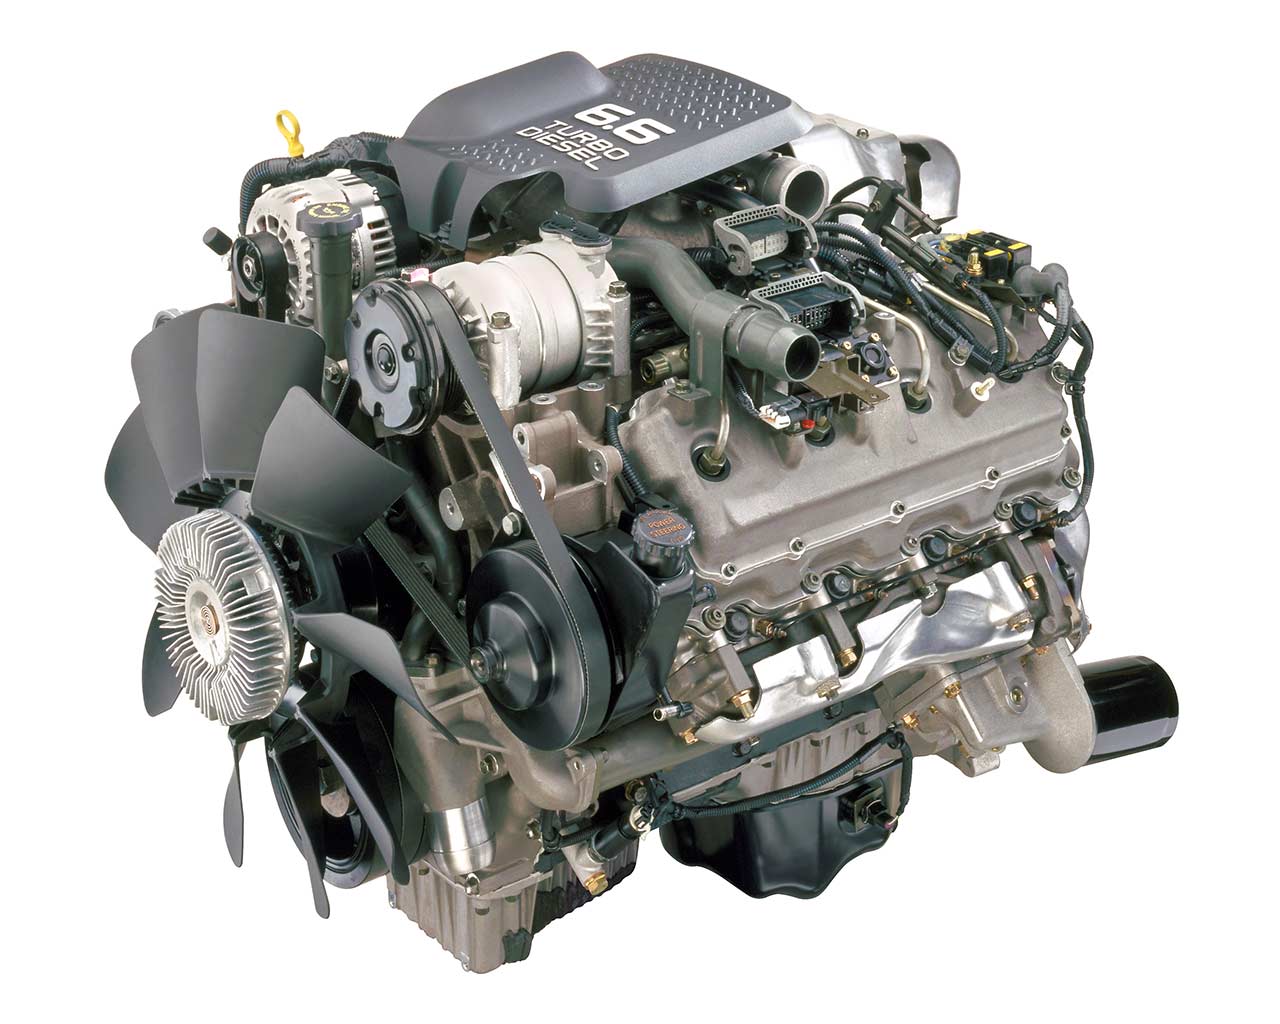 What is the Best Duramax Engine?